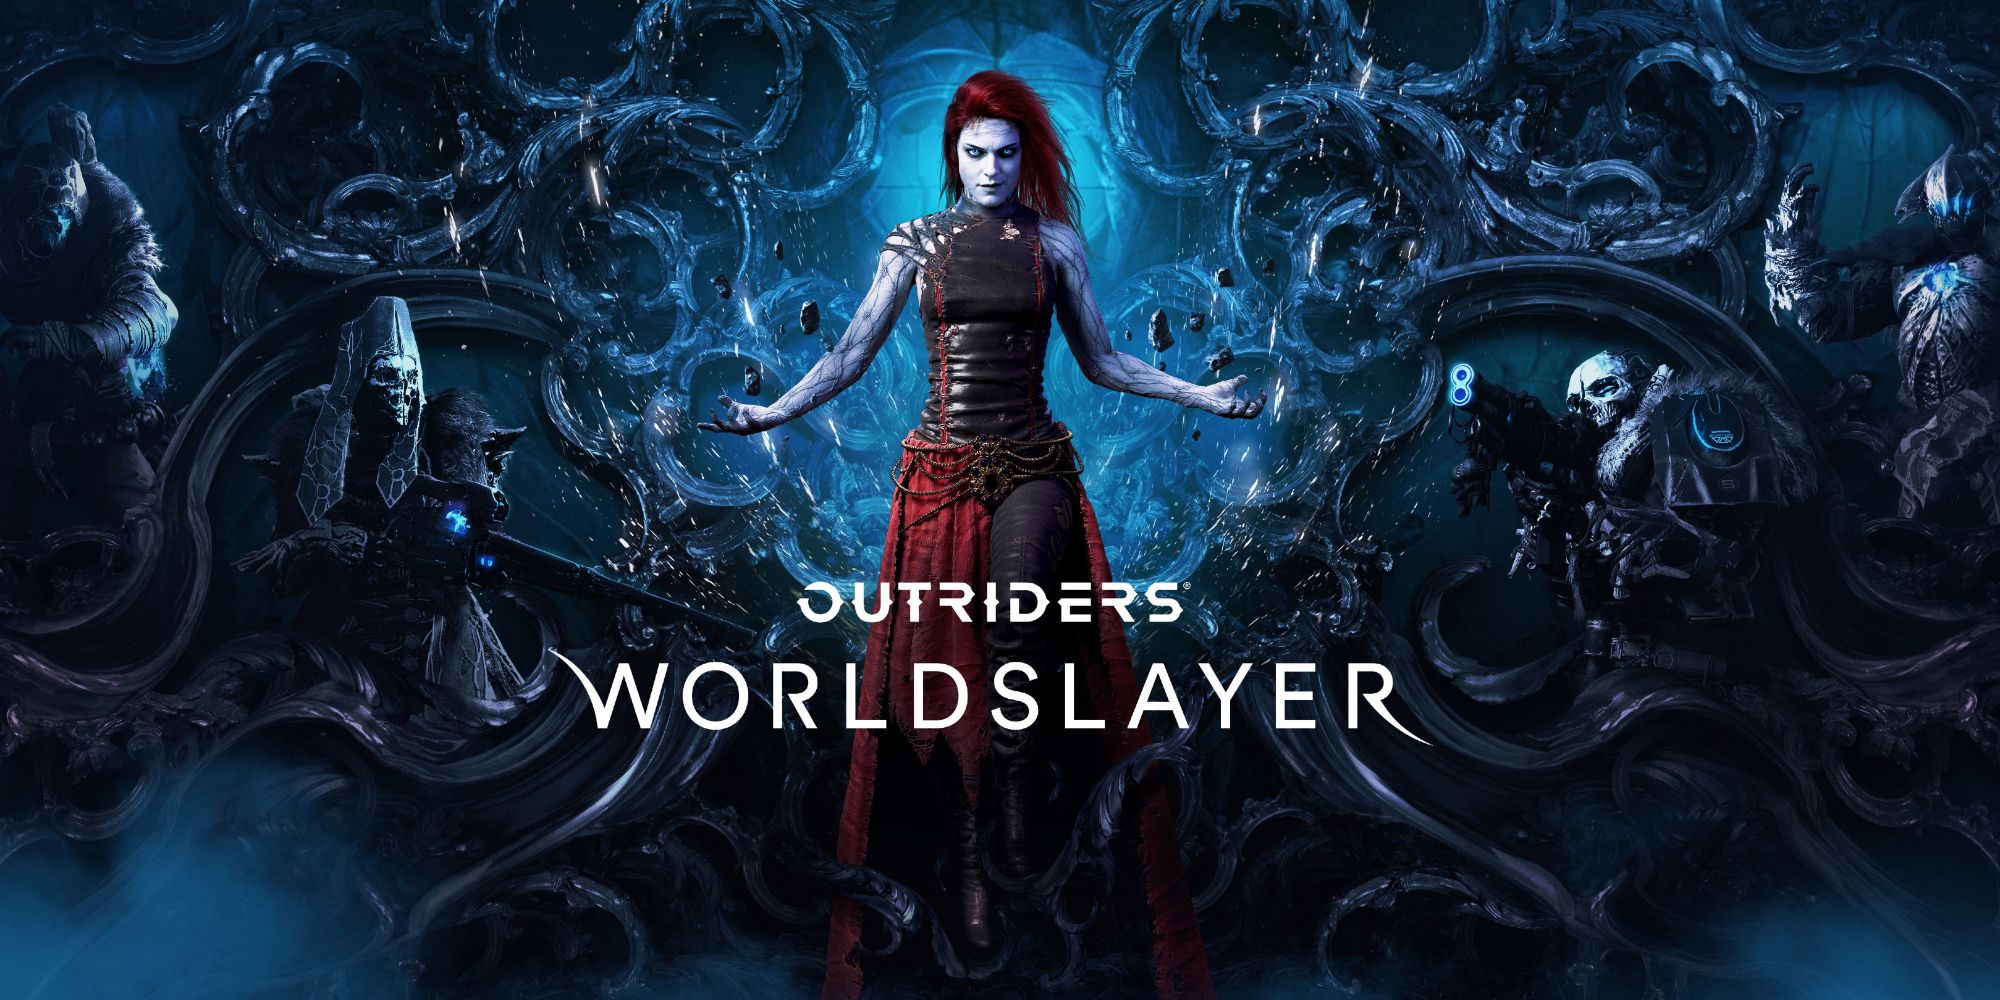 The Outriders Worldslayer DLC expansion is bringing a new campaign and revamped endgame to the looter shooter